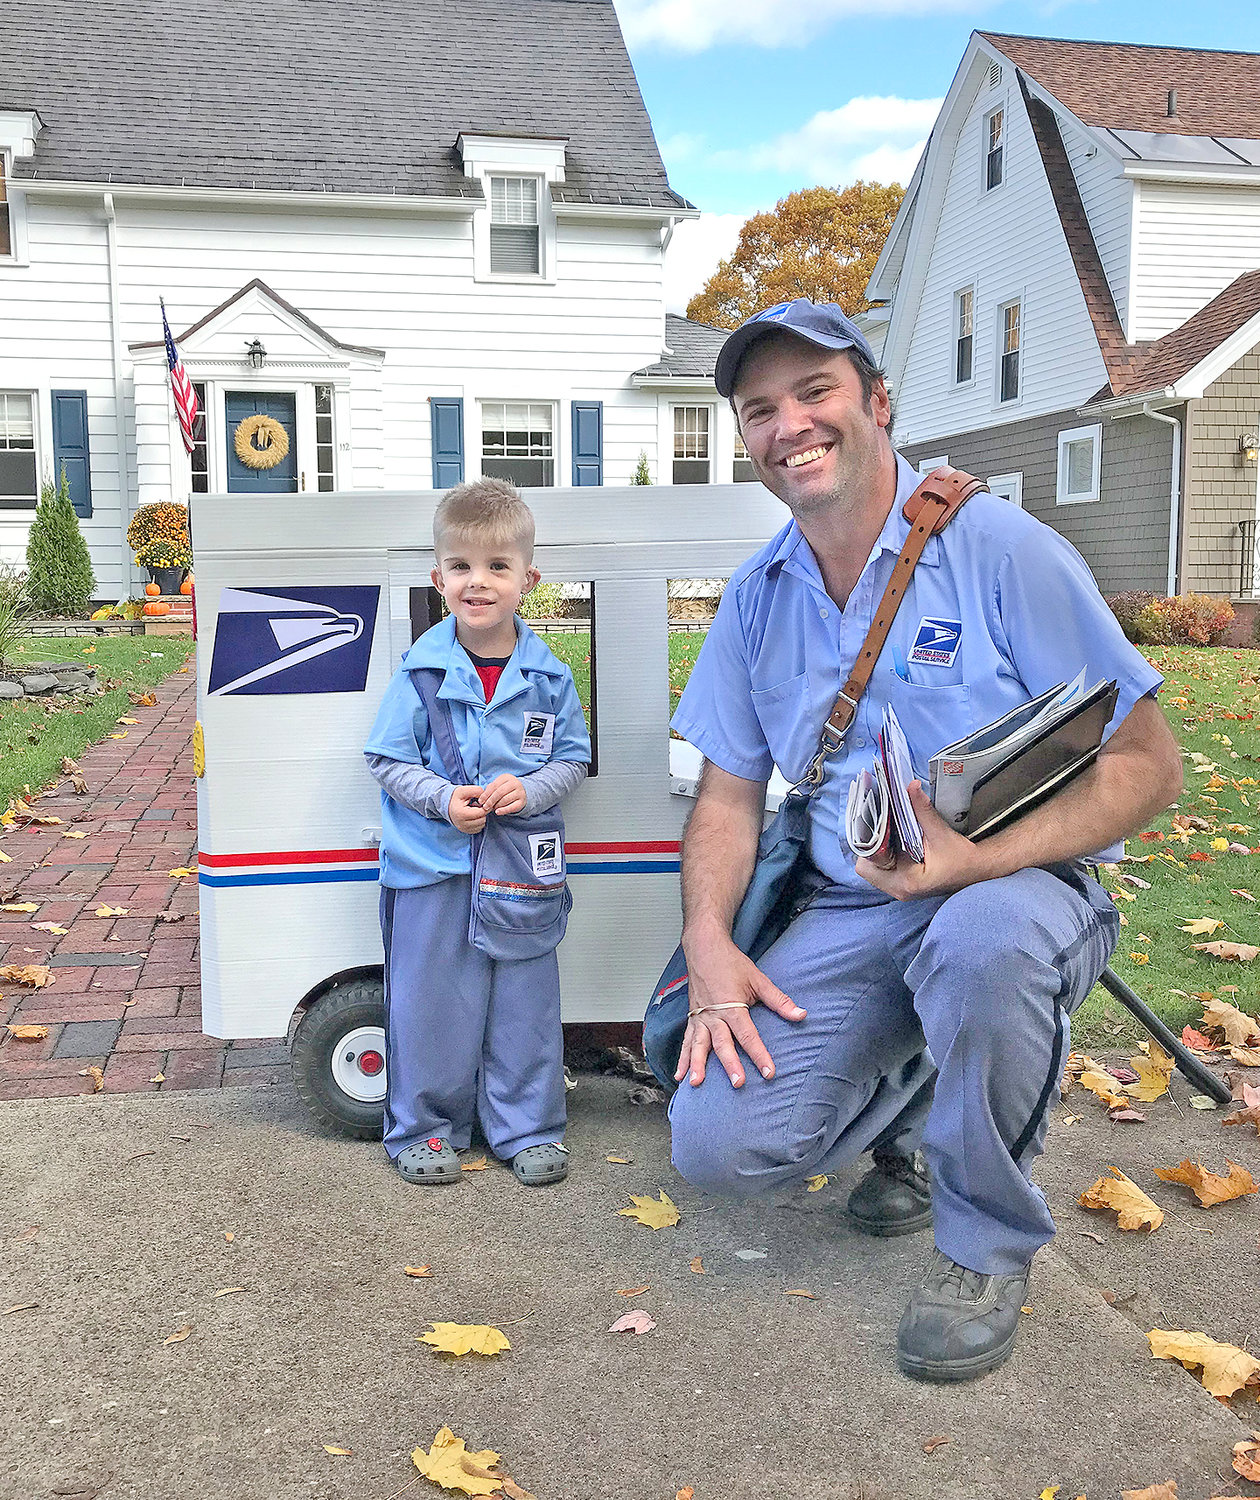 BUDDIES — Peter Corigliano IV wants to be a mailman when he grows up, which became the inspiration for his Halloween costume. Here, along with his own mail delivery truck, Peter is pictured with his buddy, professional postal worker Andy Wendt, who delivers mail in Peter’s neighborhood. (Photo submitted)